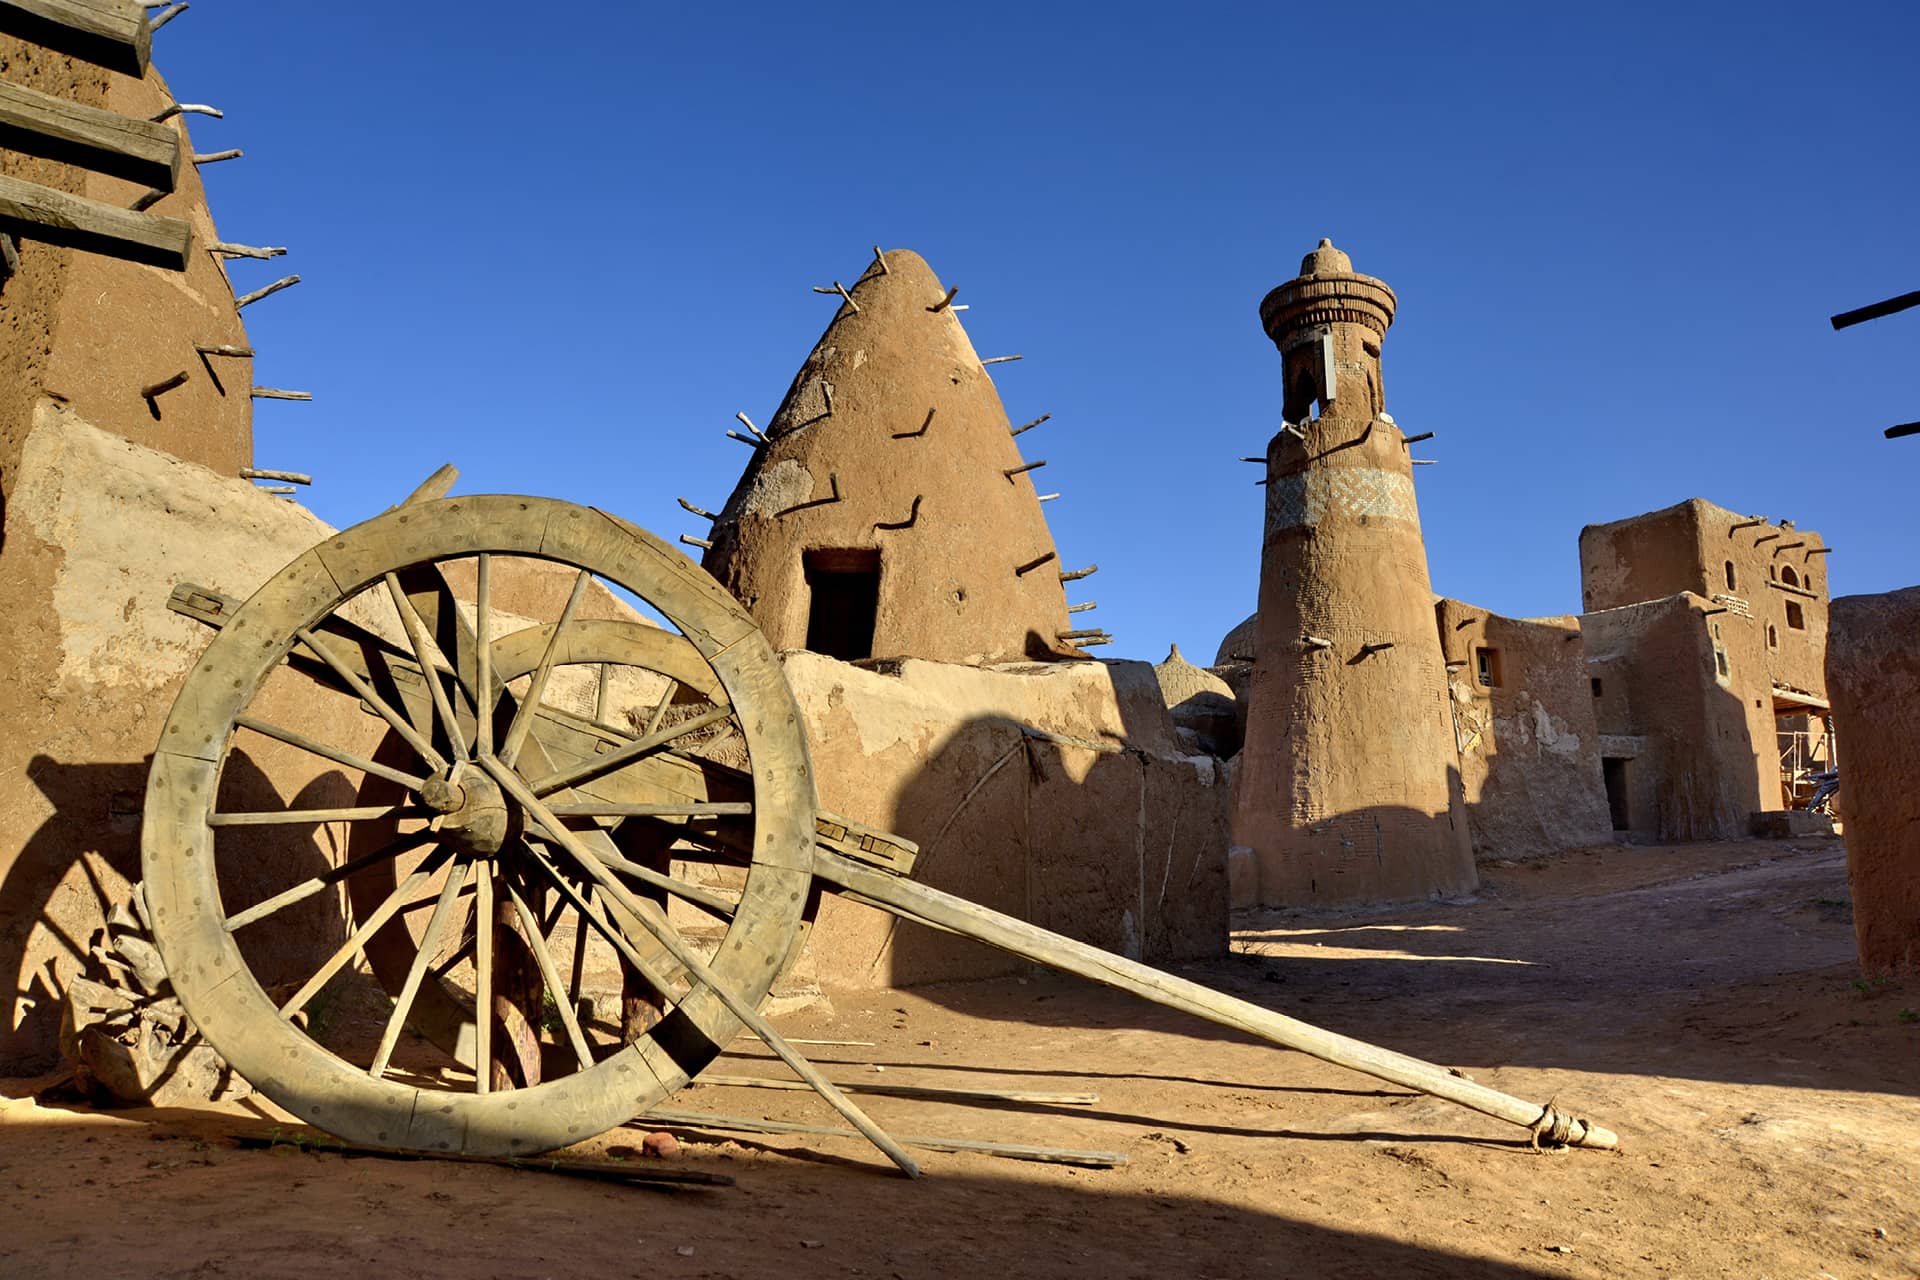 Buildings of an old ruined city-museum in the Middle East, a brown fortress wall with cone-shaped towers with wooden support sticks inside, a lighthouse, a wooden wagon in front.